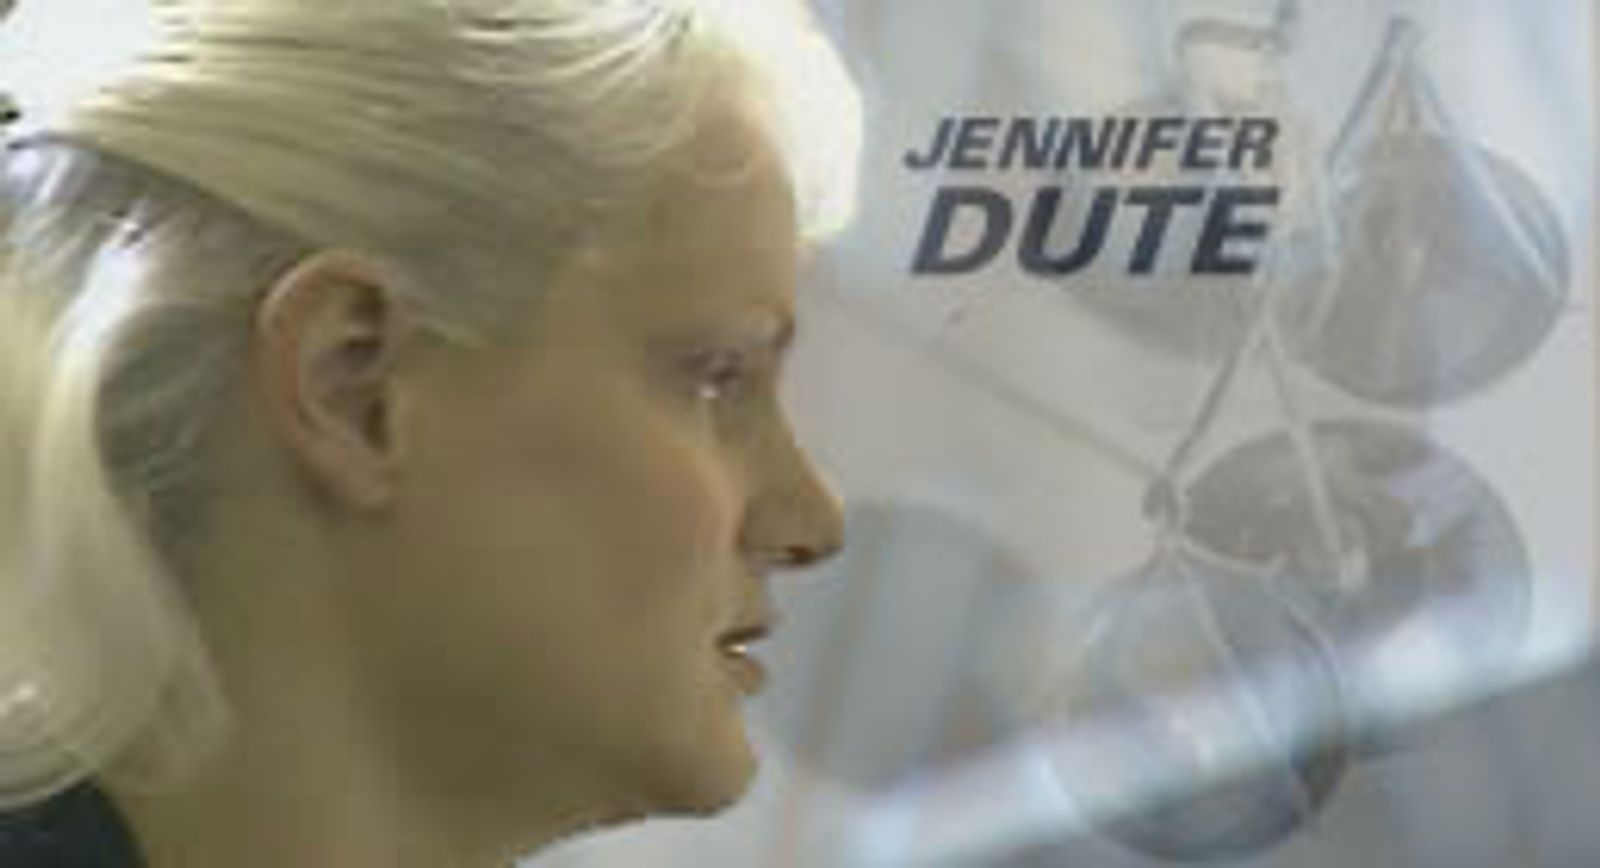 Jennifer Dute Conviction Reversed and Remanded